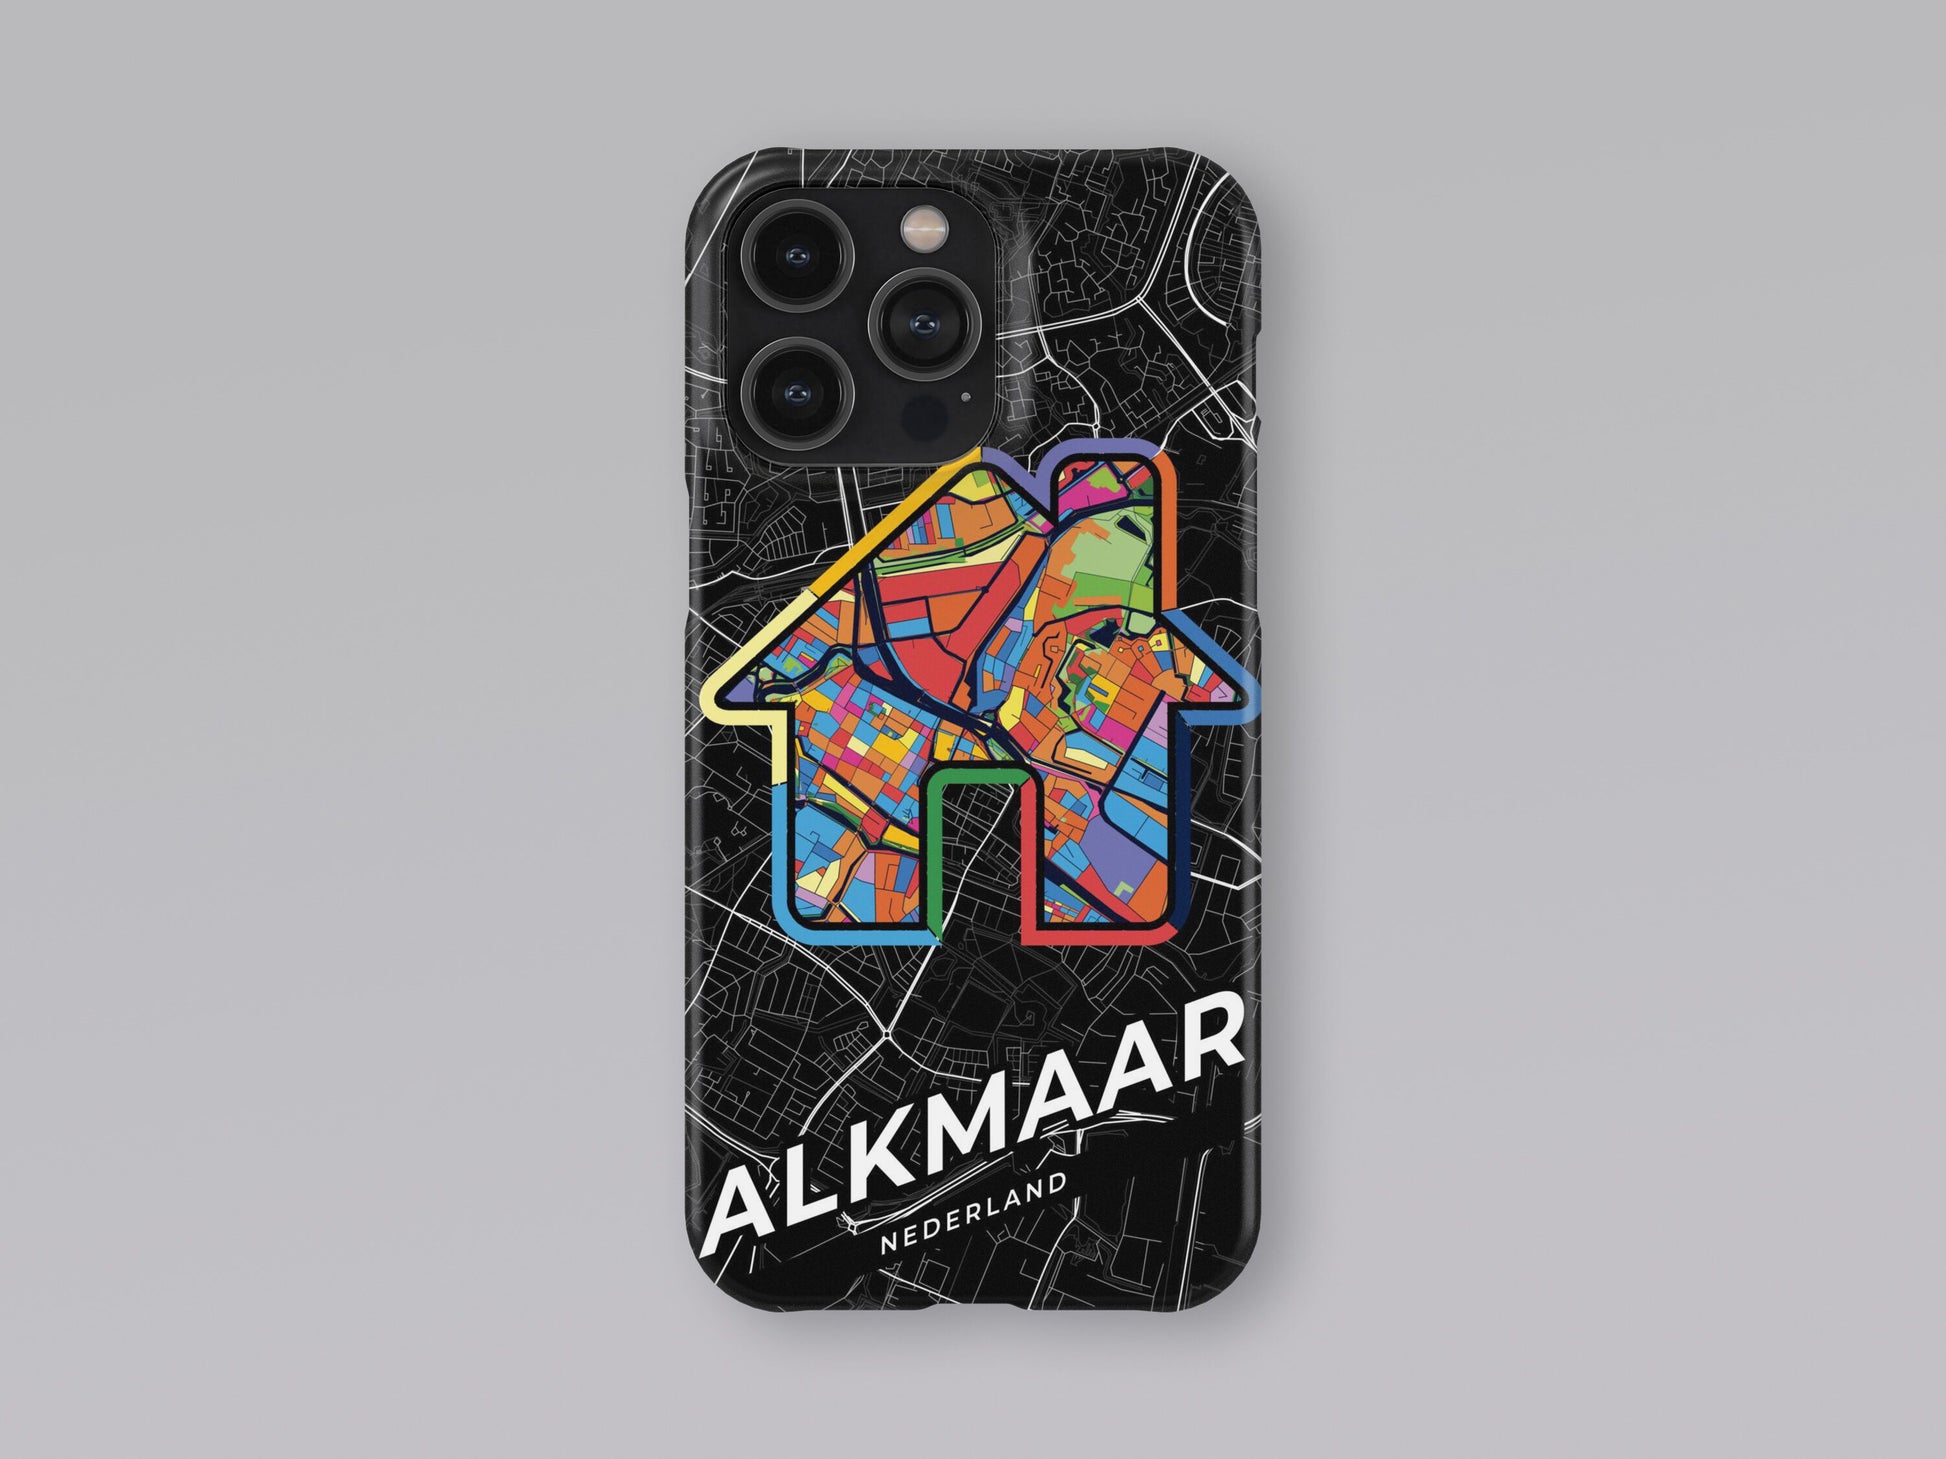 Alkmaar Netherlands slim phone case with colorful icon. Birthday, wedding or housewarming gift. Couple match cases. 3